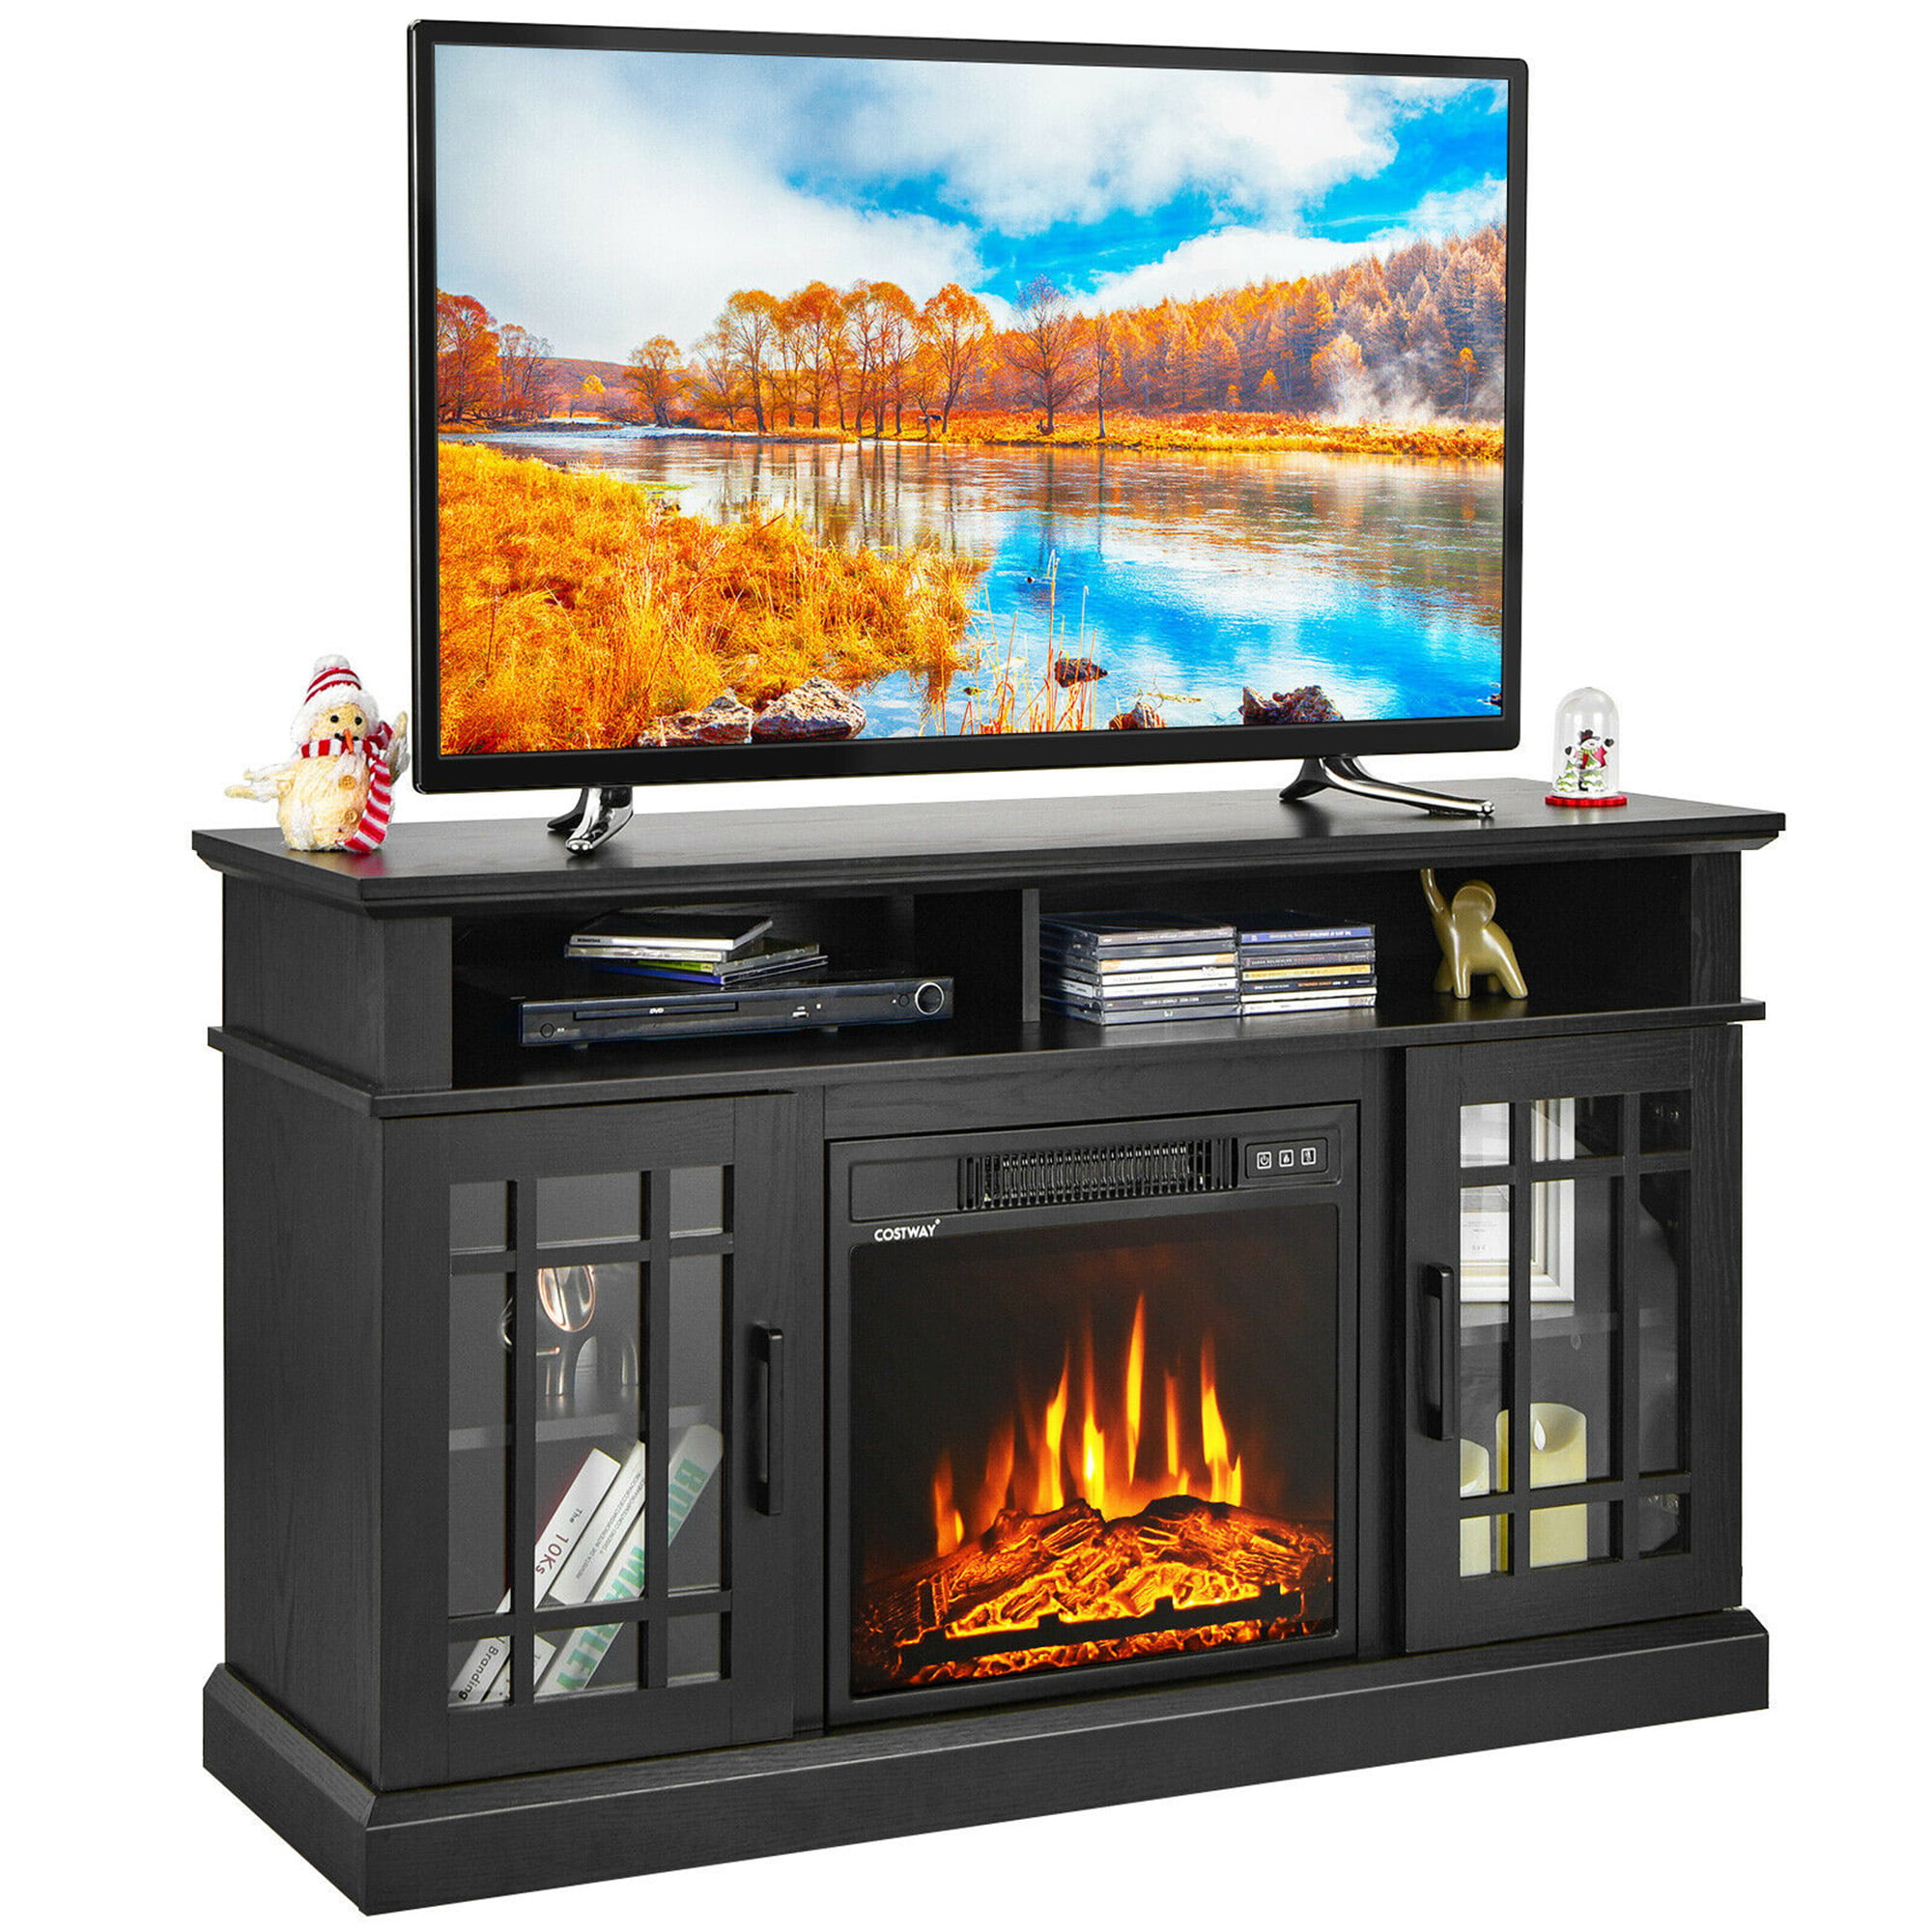 Details about   Farmhouse Fireplace TV Stand Media Console Cabinet Electric 45 46 47 50 55 